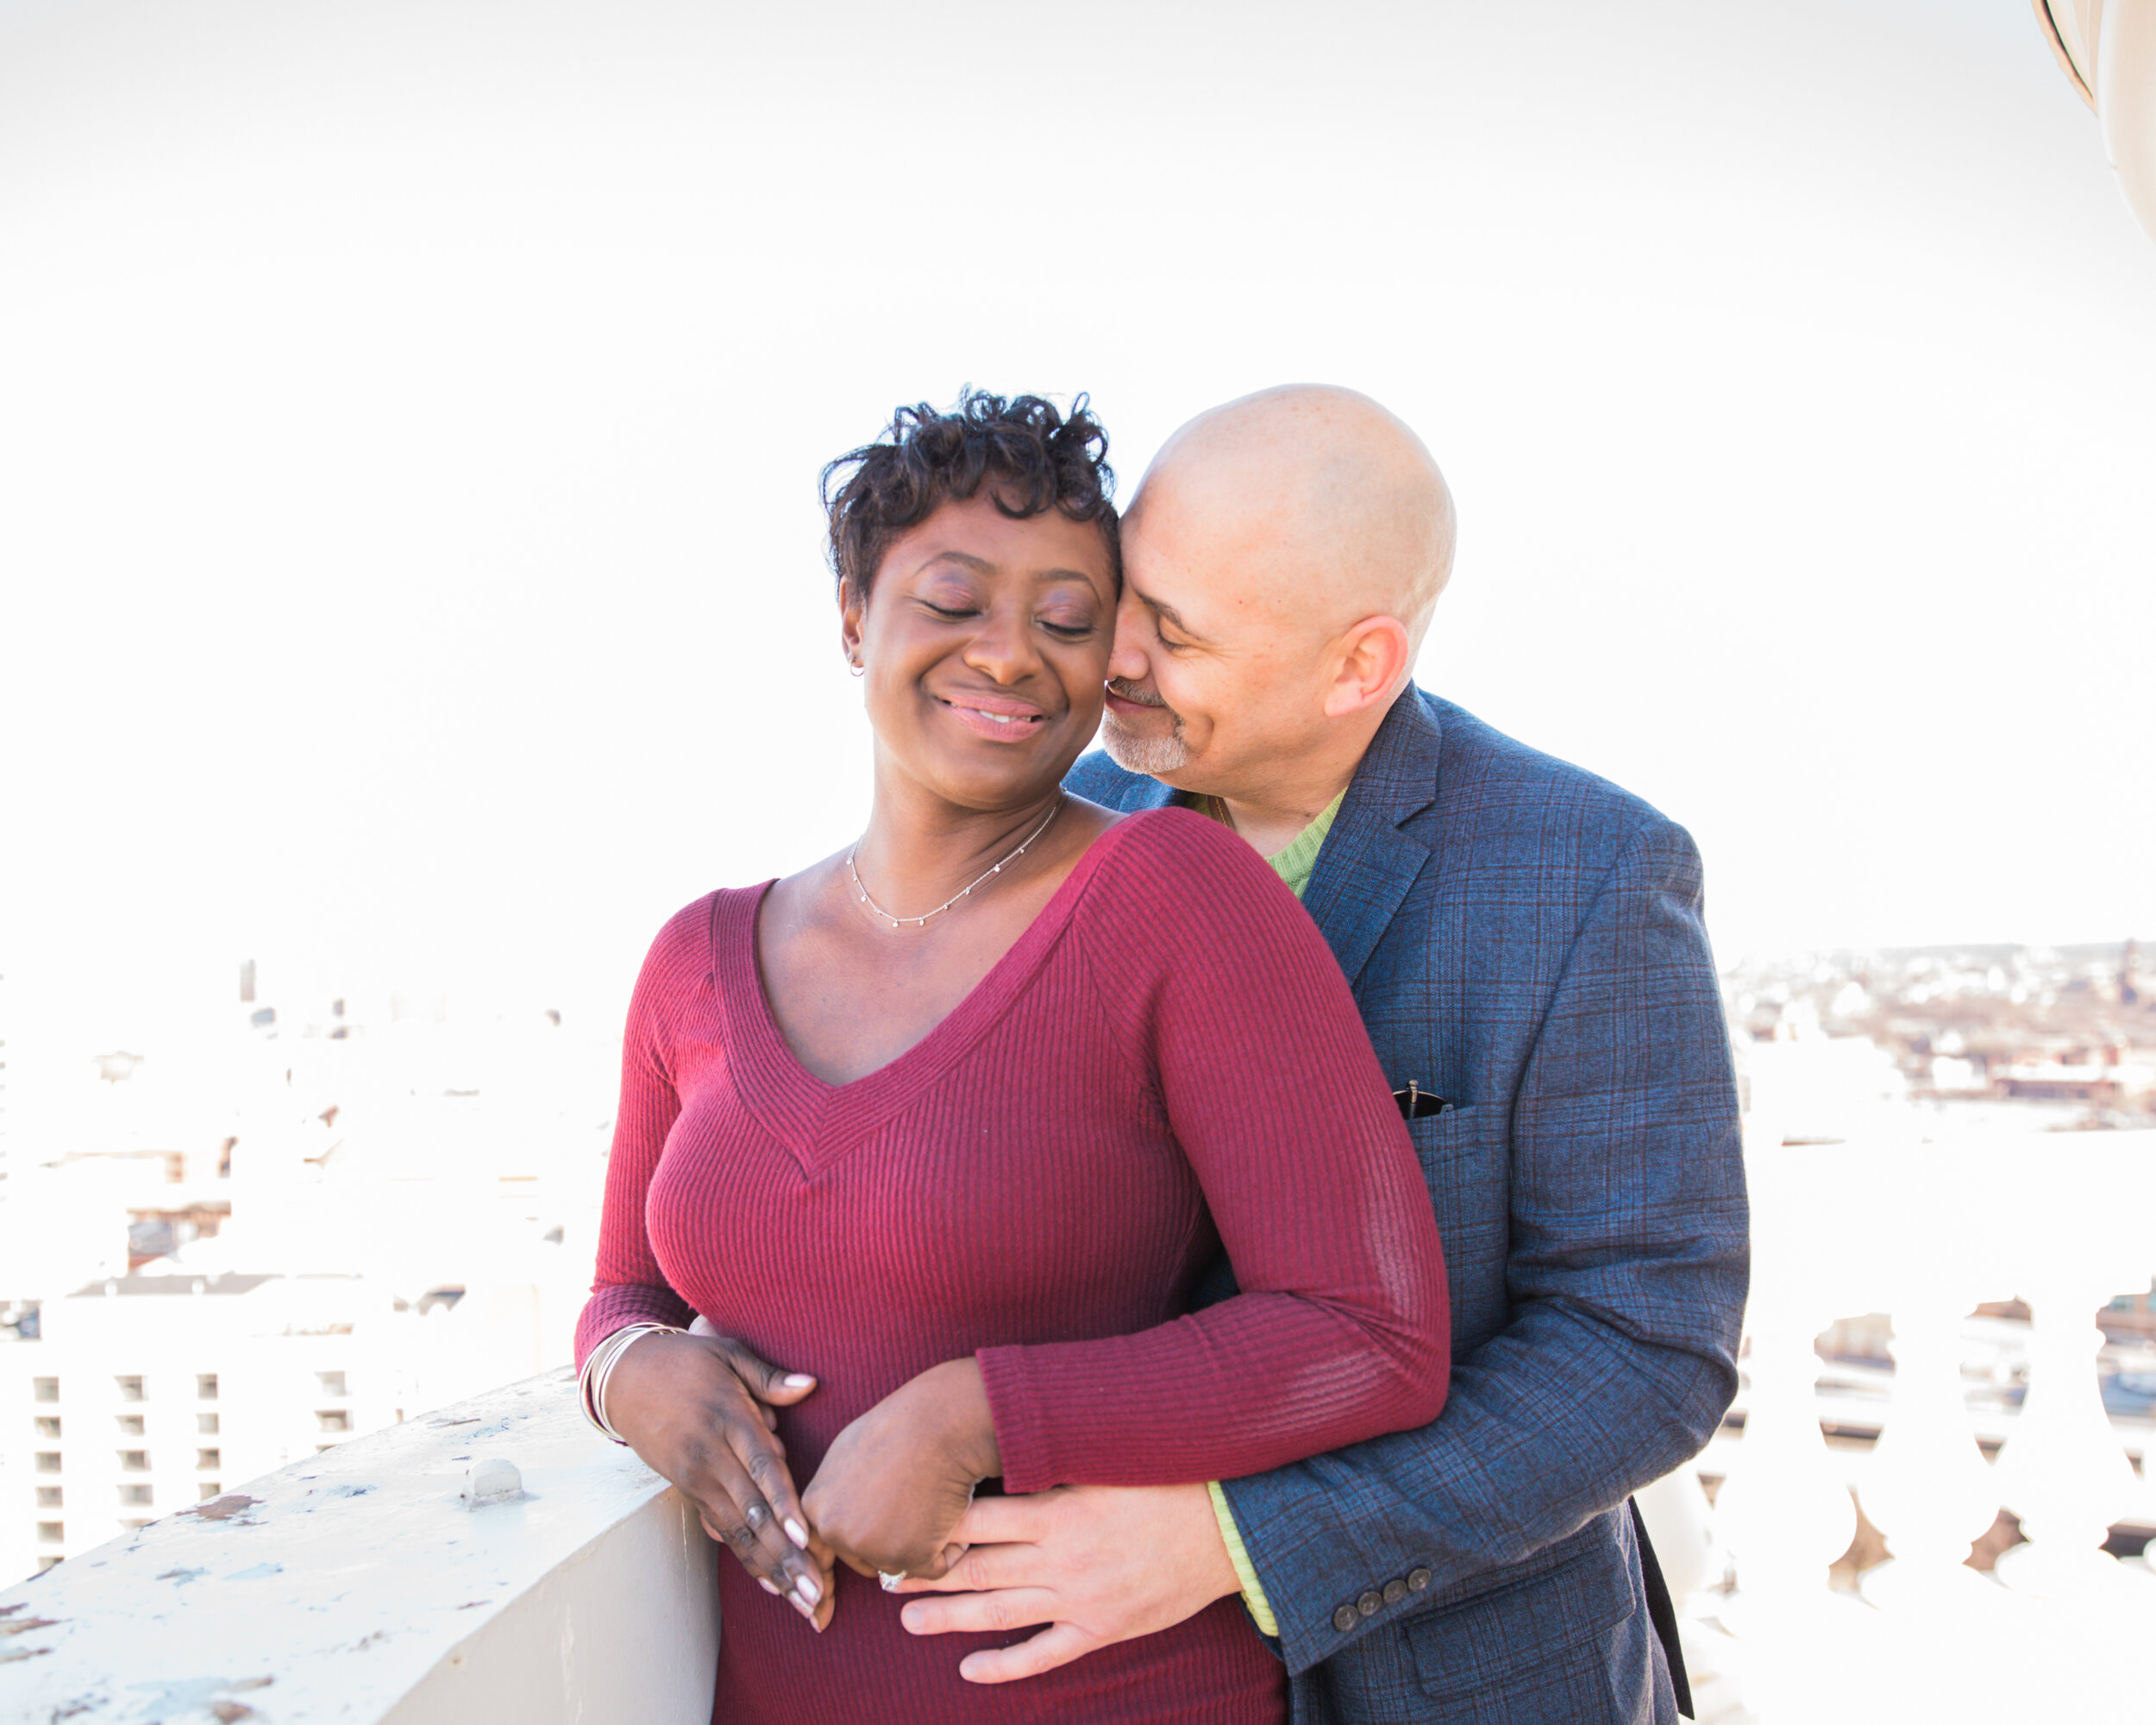 Beautiful Engagement Session at Baltimore City Hall by Baltimores Best Wedding Photographers Megapixels Media Black Wedding Photographers-9.jpg